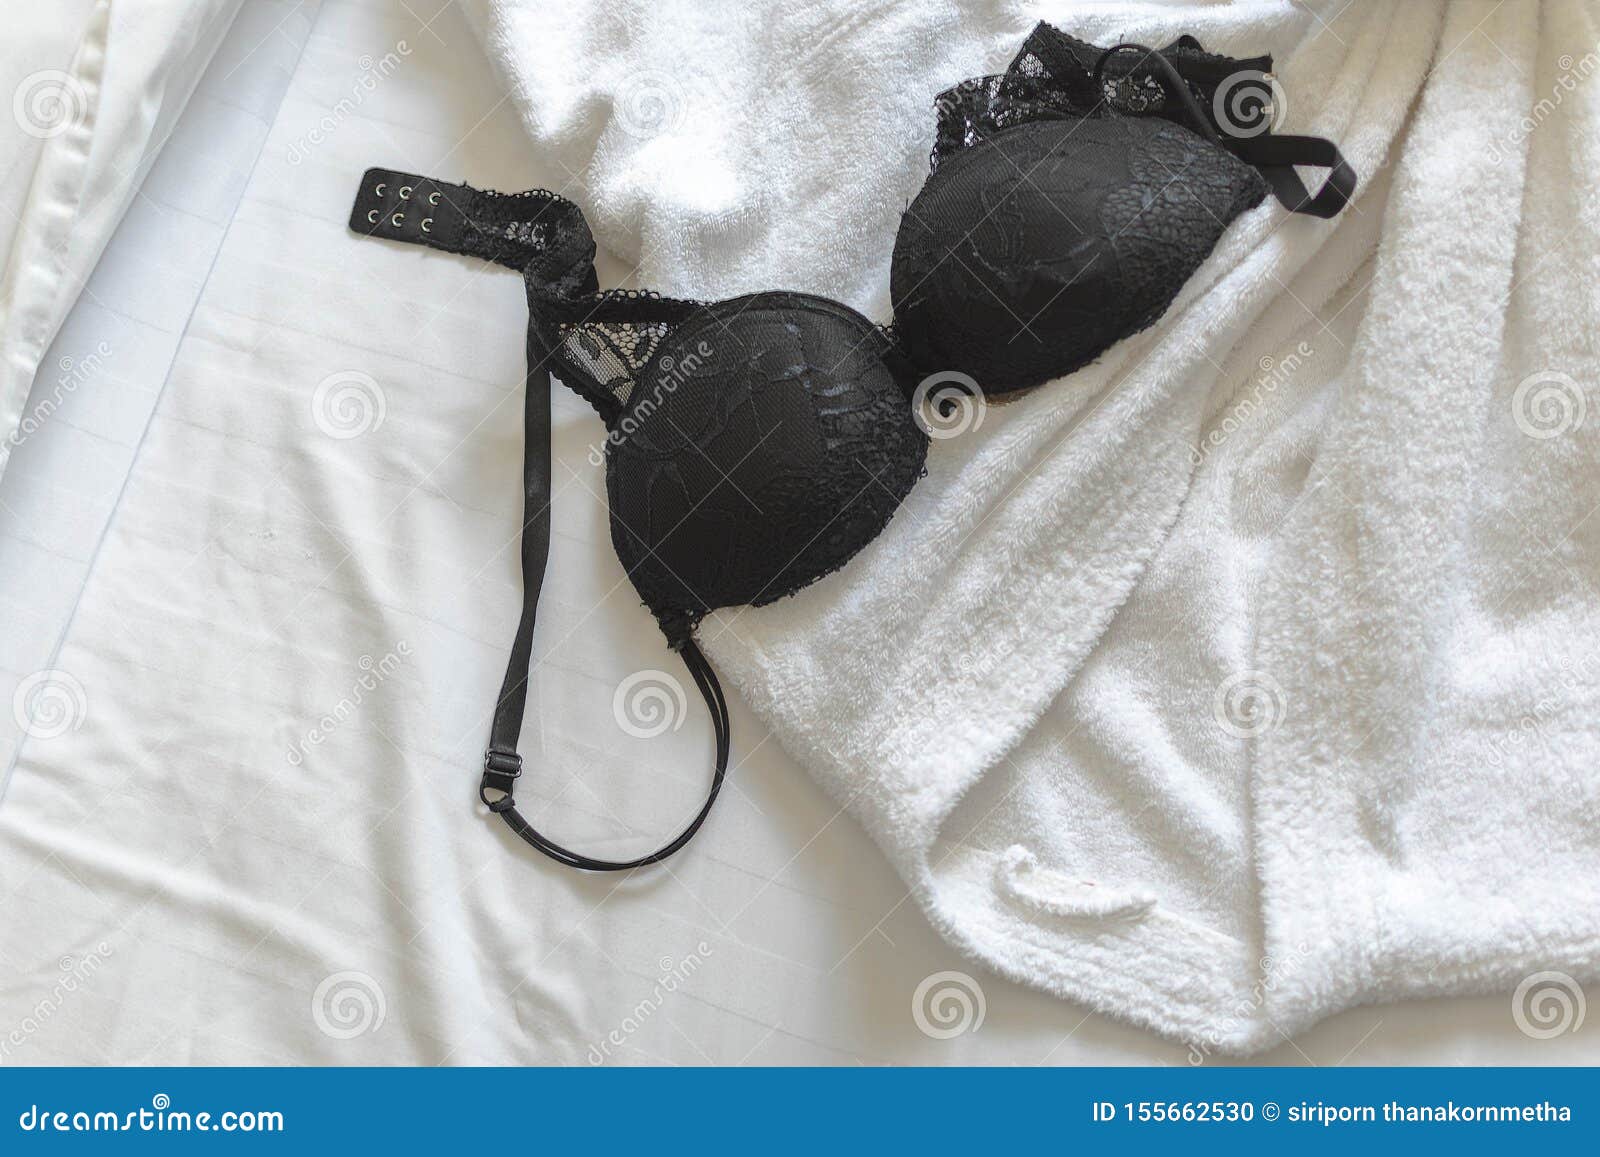 Top View of Black Bra with Hotel Bath Rope on the White Hotel Bed